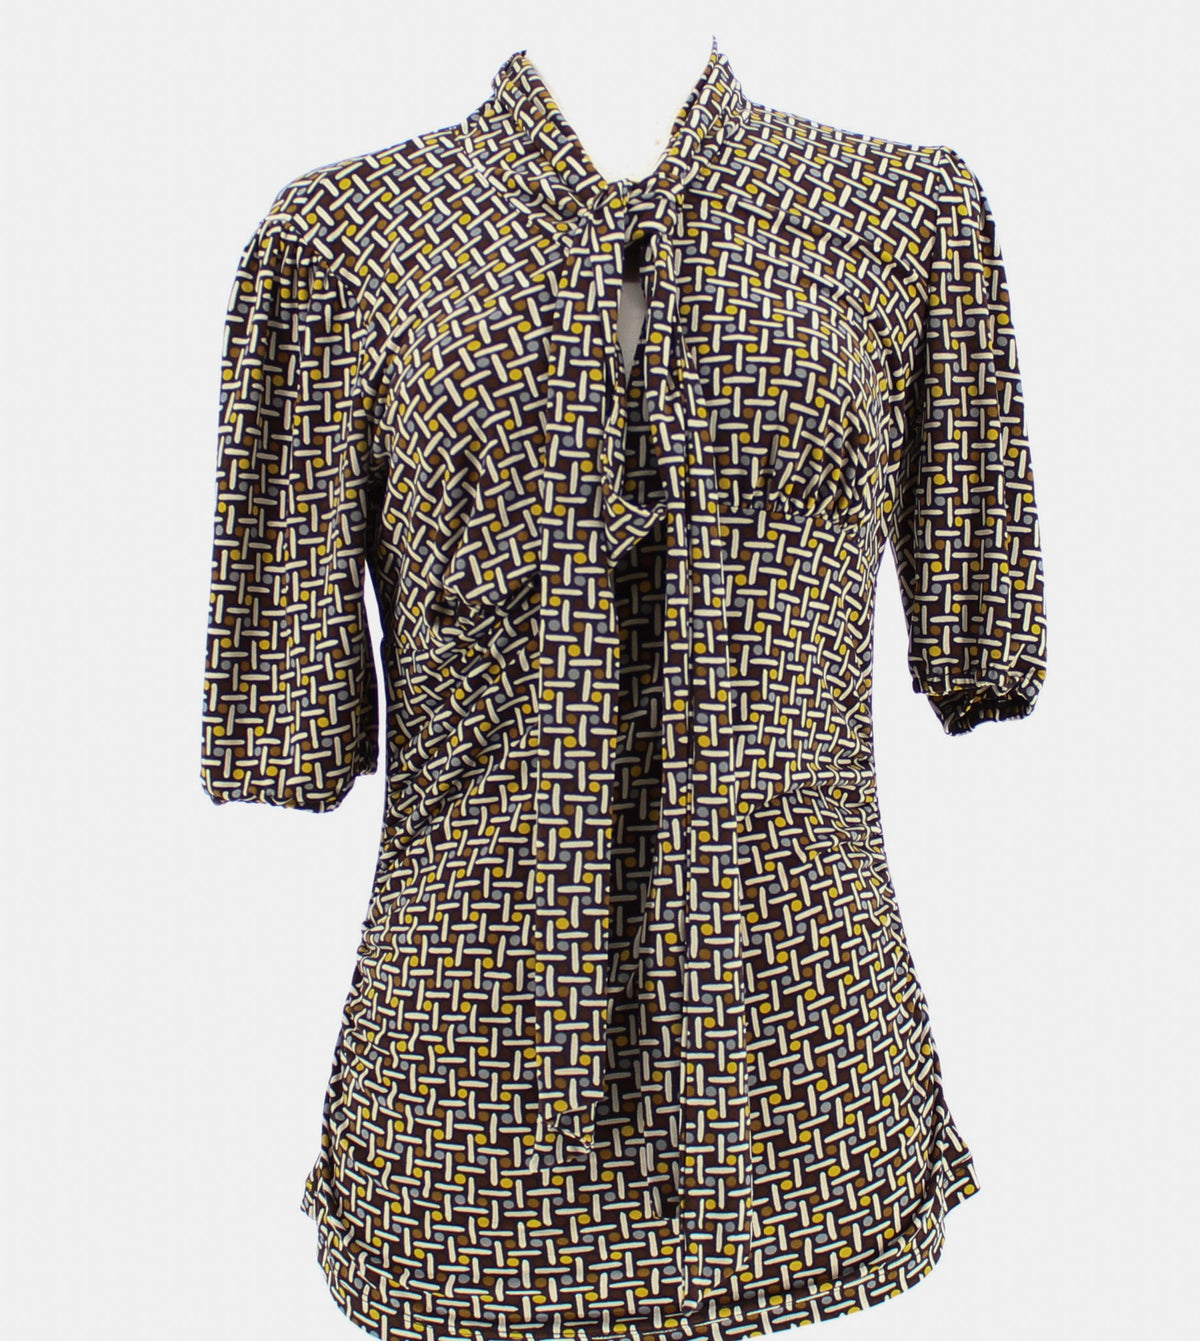 New York Company V-neck Front Tie Short Sleeved Blouse with Empire Blouse